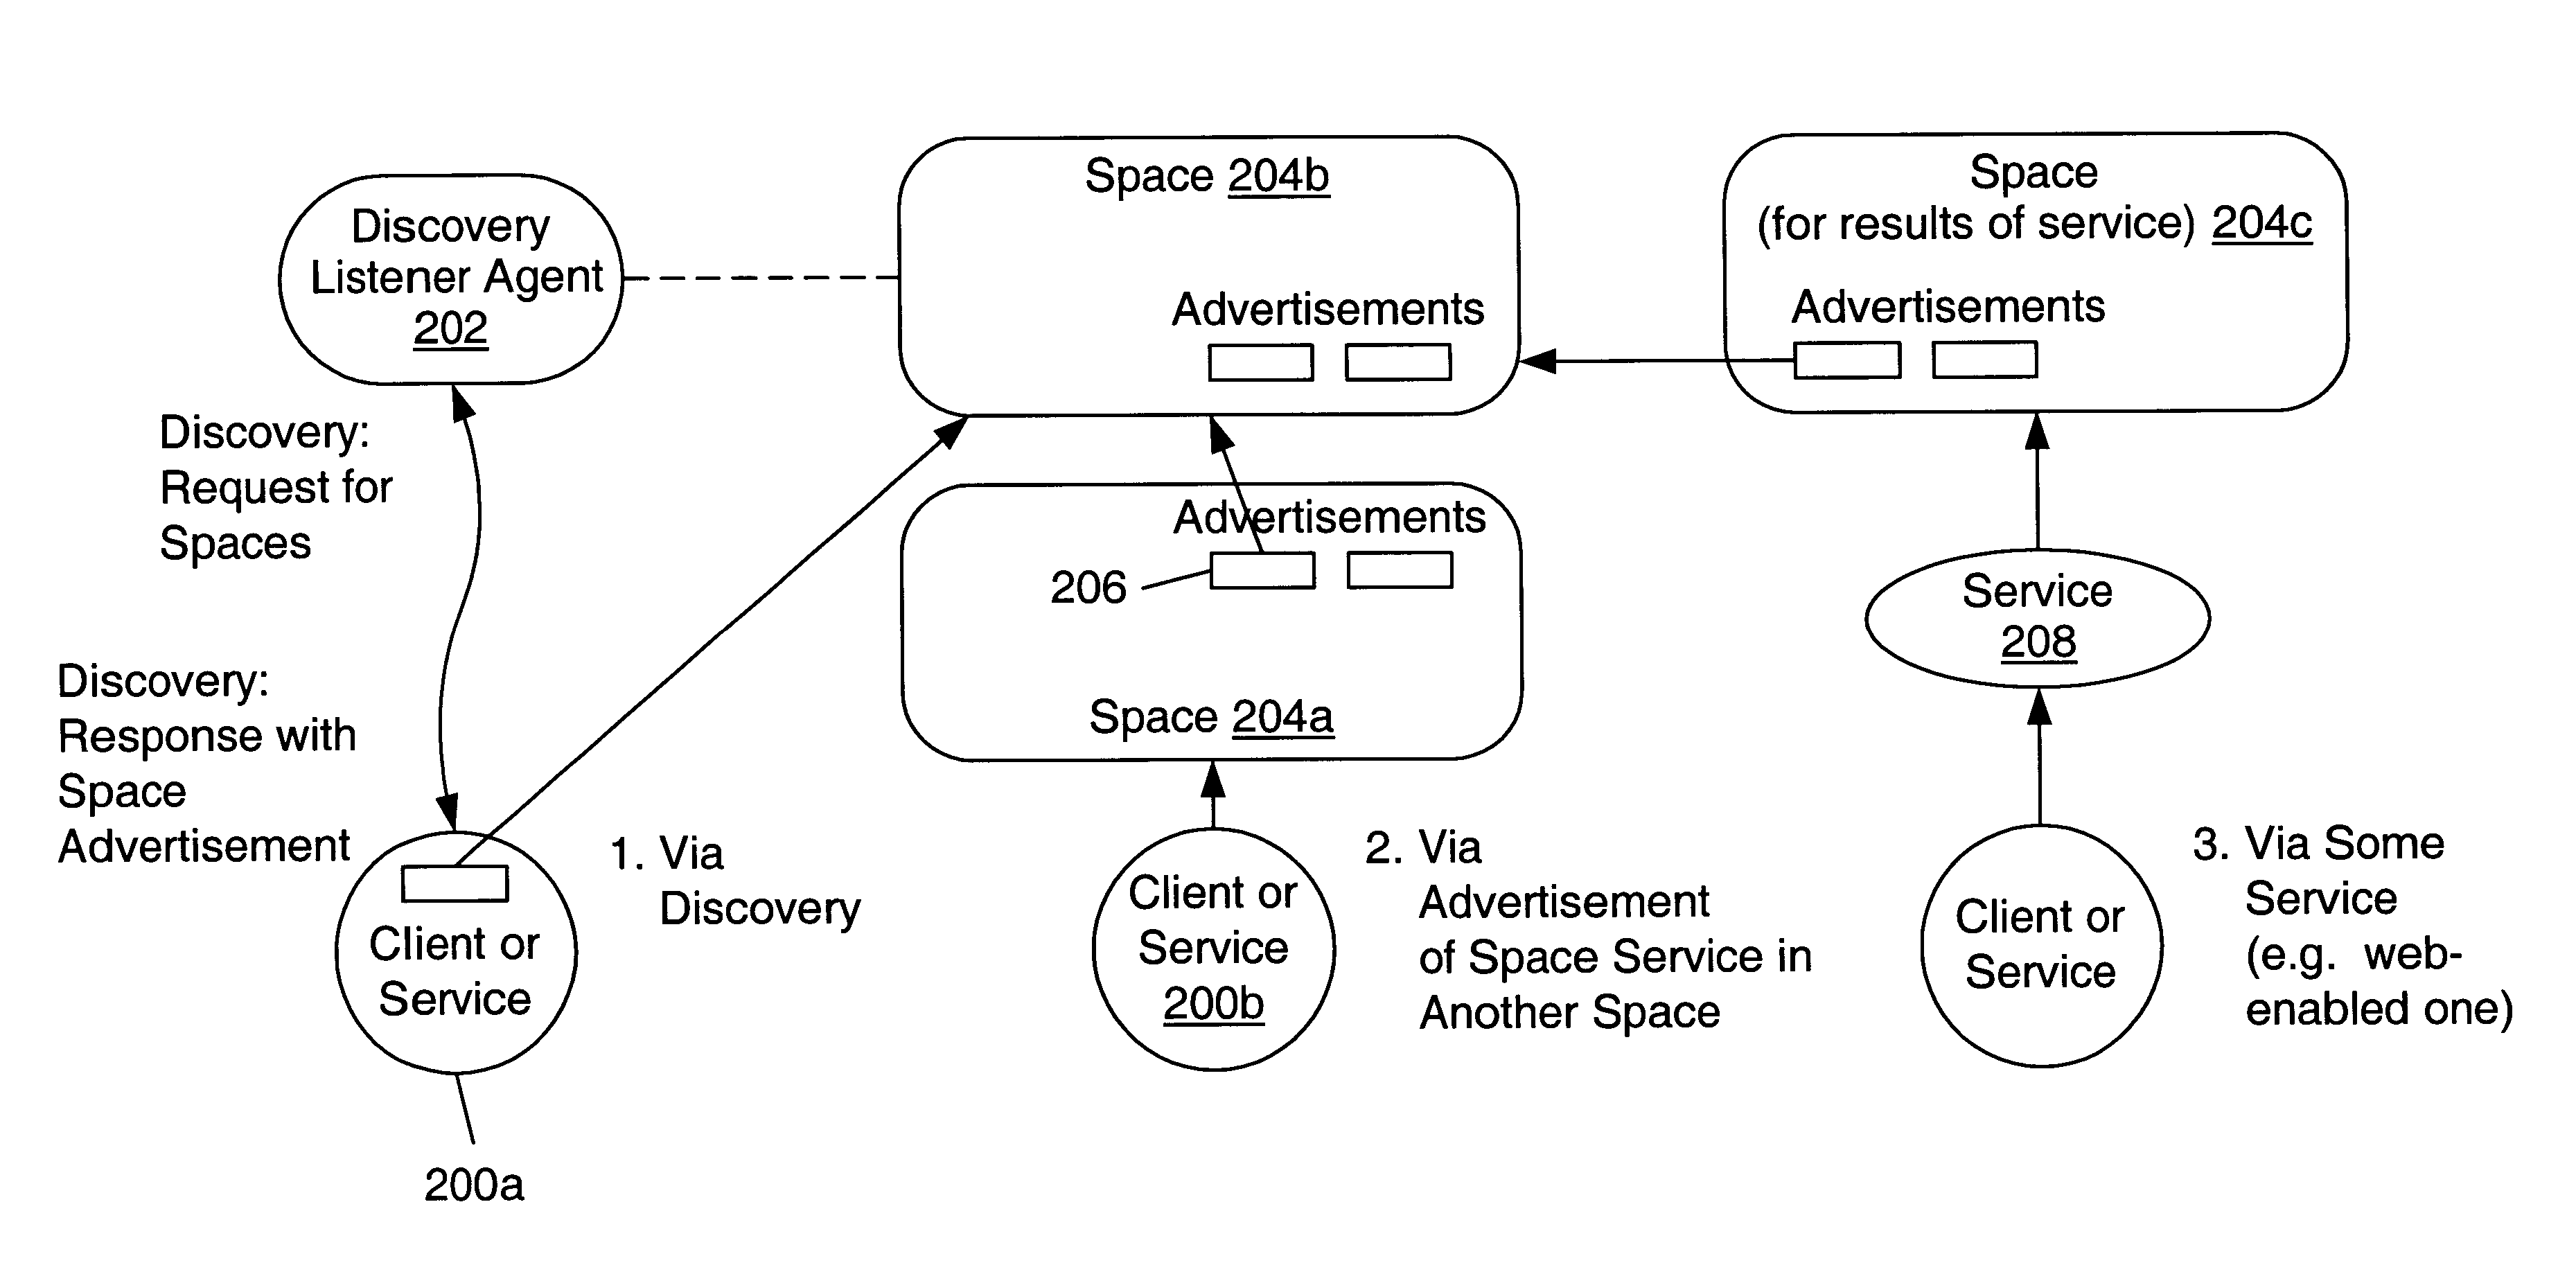 Method and apparatus to discover services using flexible search criteria